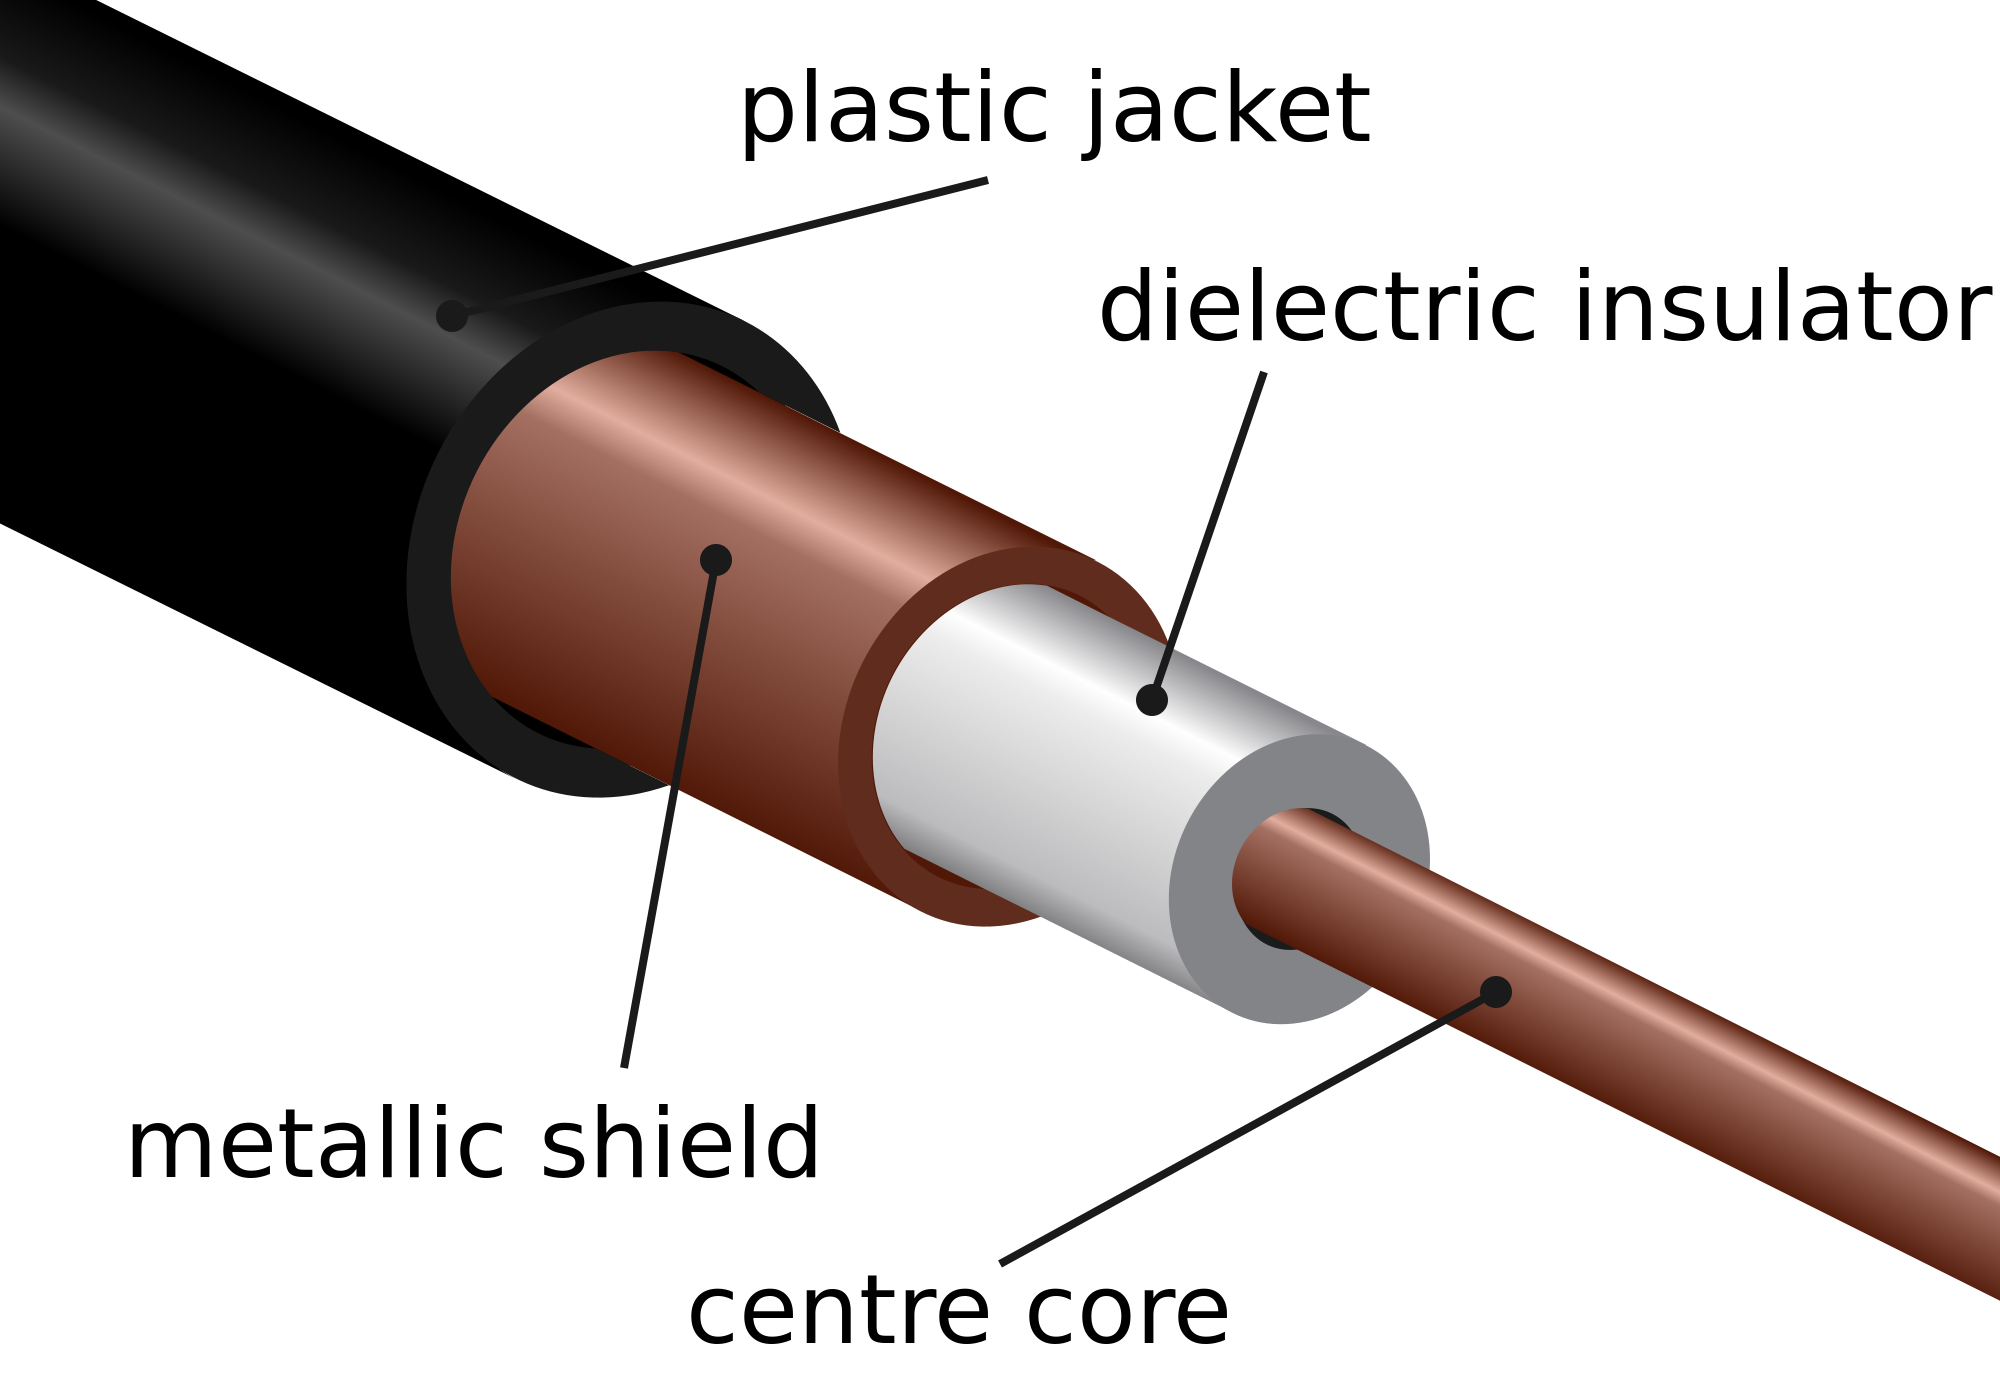 File:Coaxial cable cutaway.svg - Wikimedia Commons